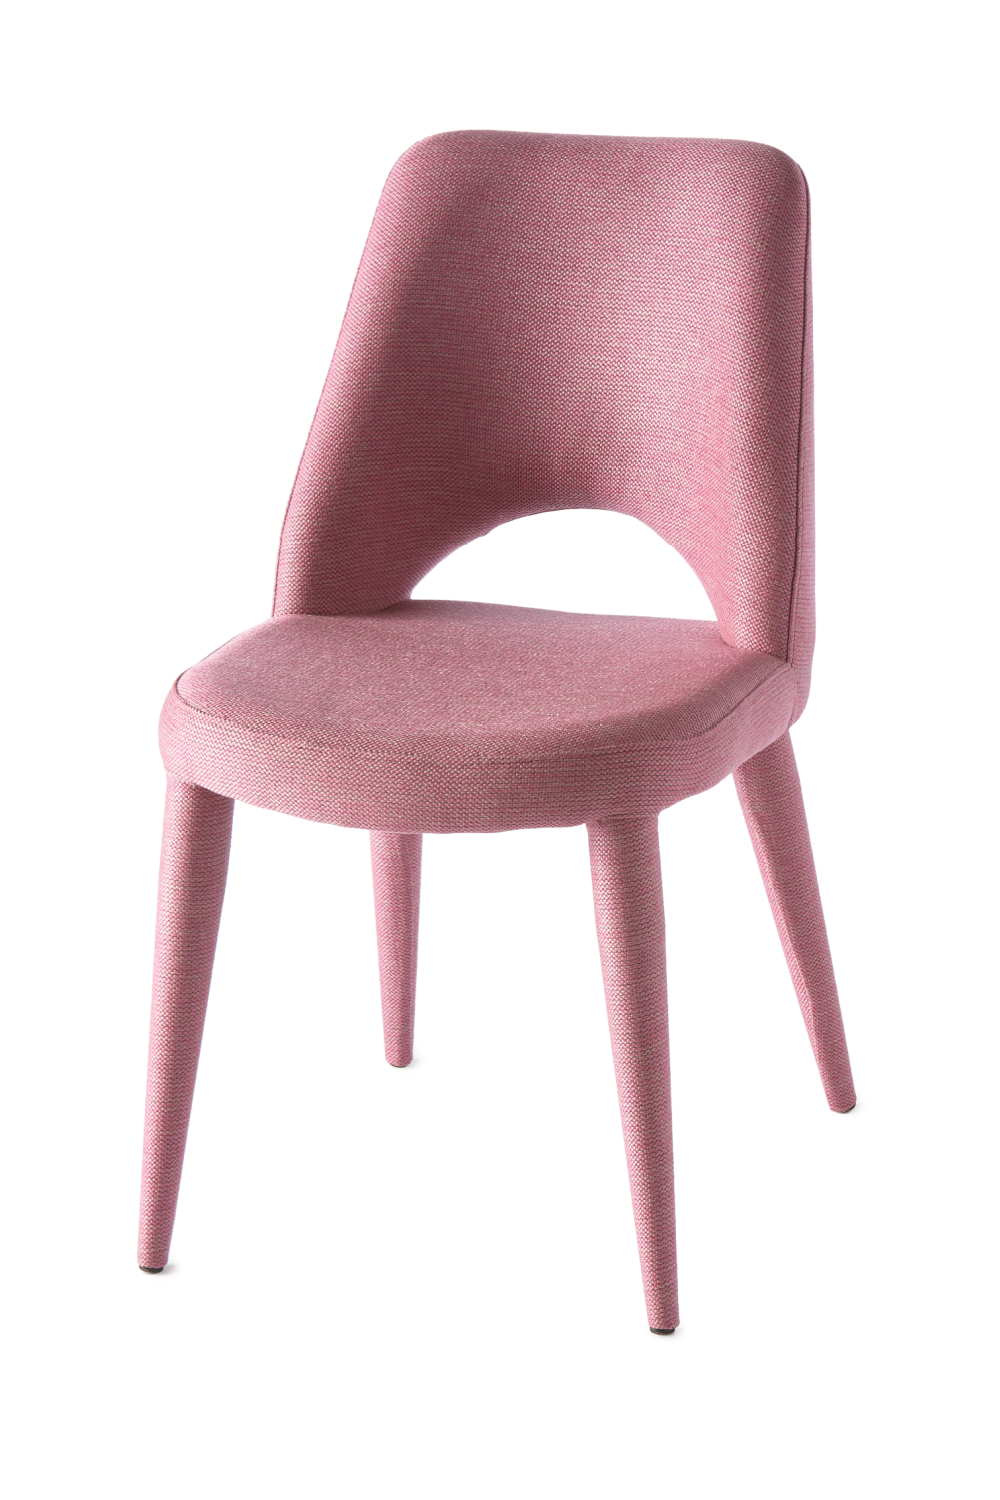 Cut-Out Back Fabric Dining Chair | Pols Potten Holy | Oroa.com